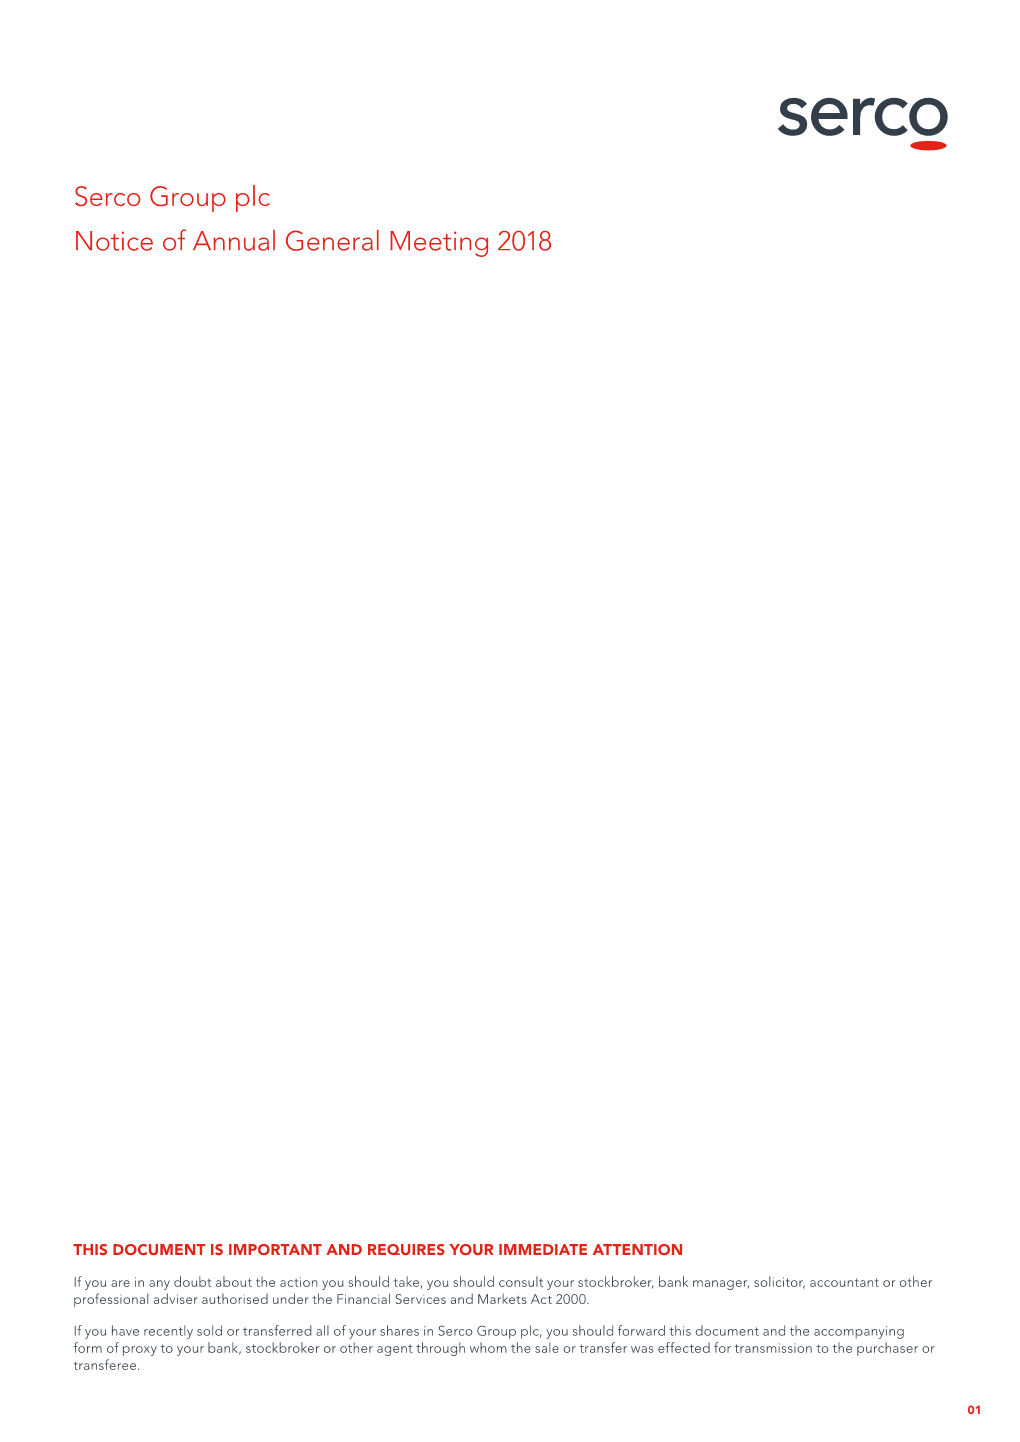 Serco Group Plc Notice of Annual General Meeting 2018